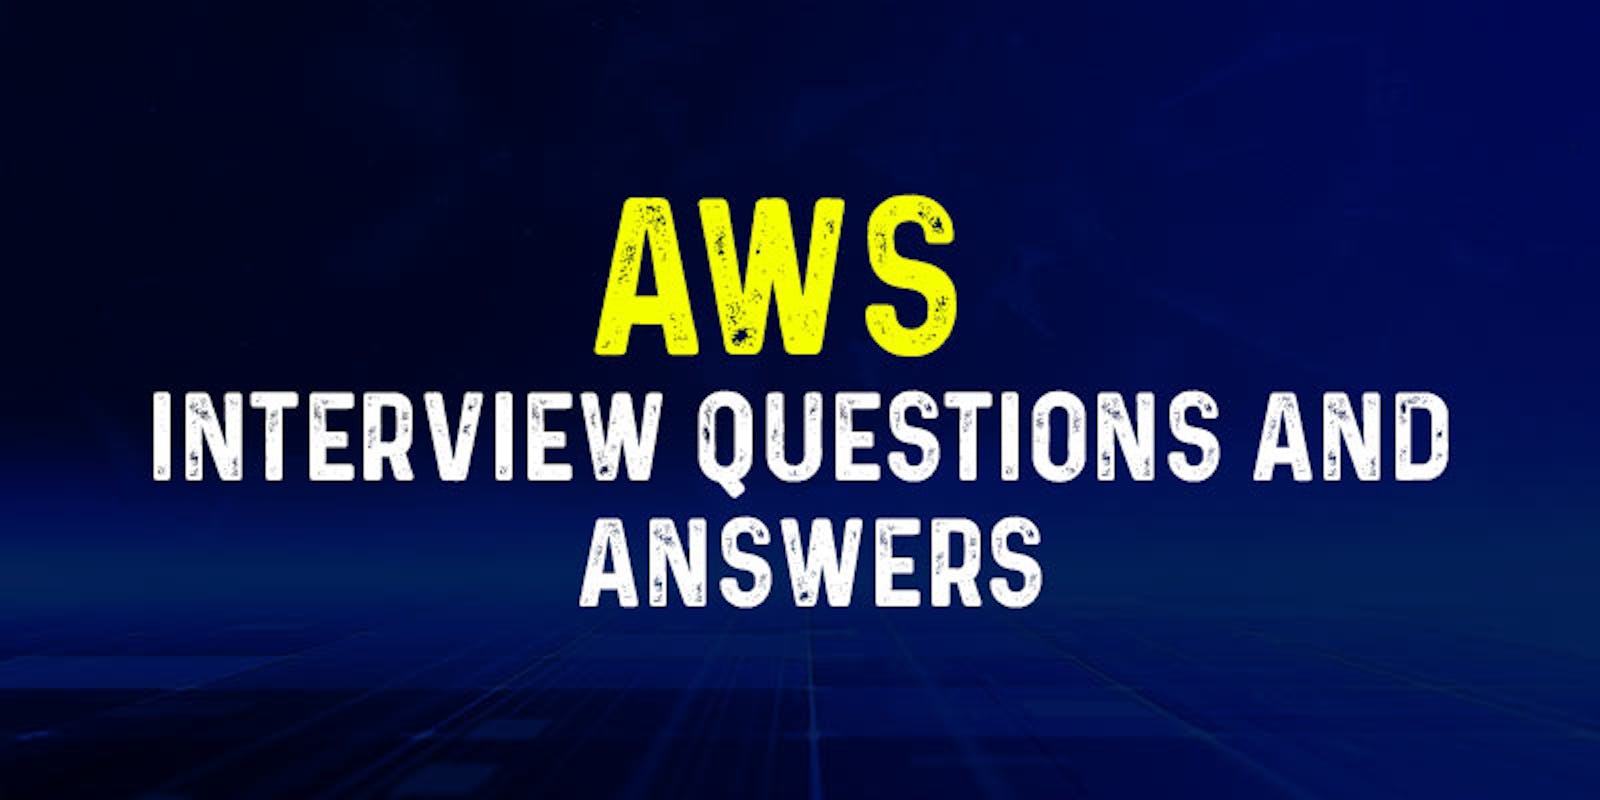 Day 49 - INTERVIEW QUESTIONS ON AWS 🚀